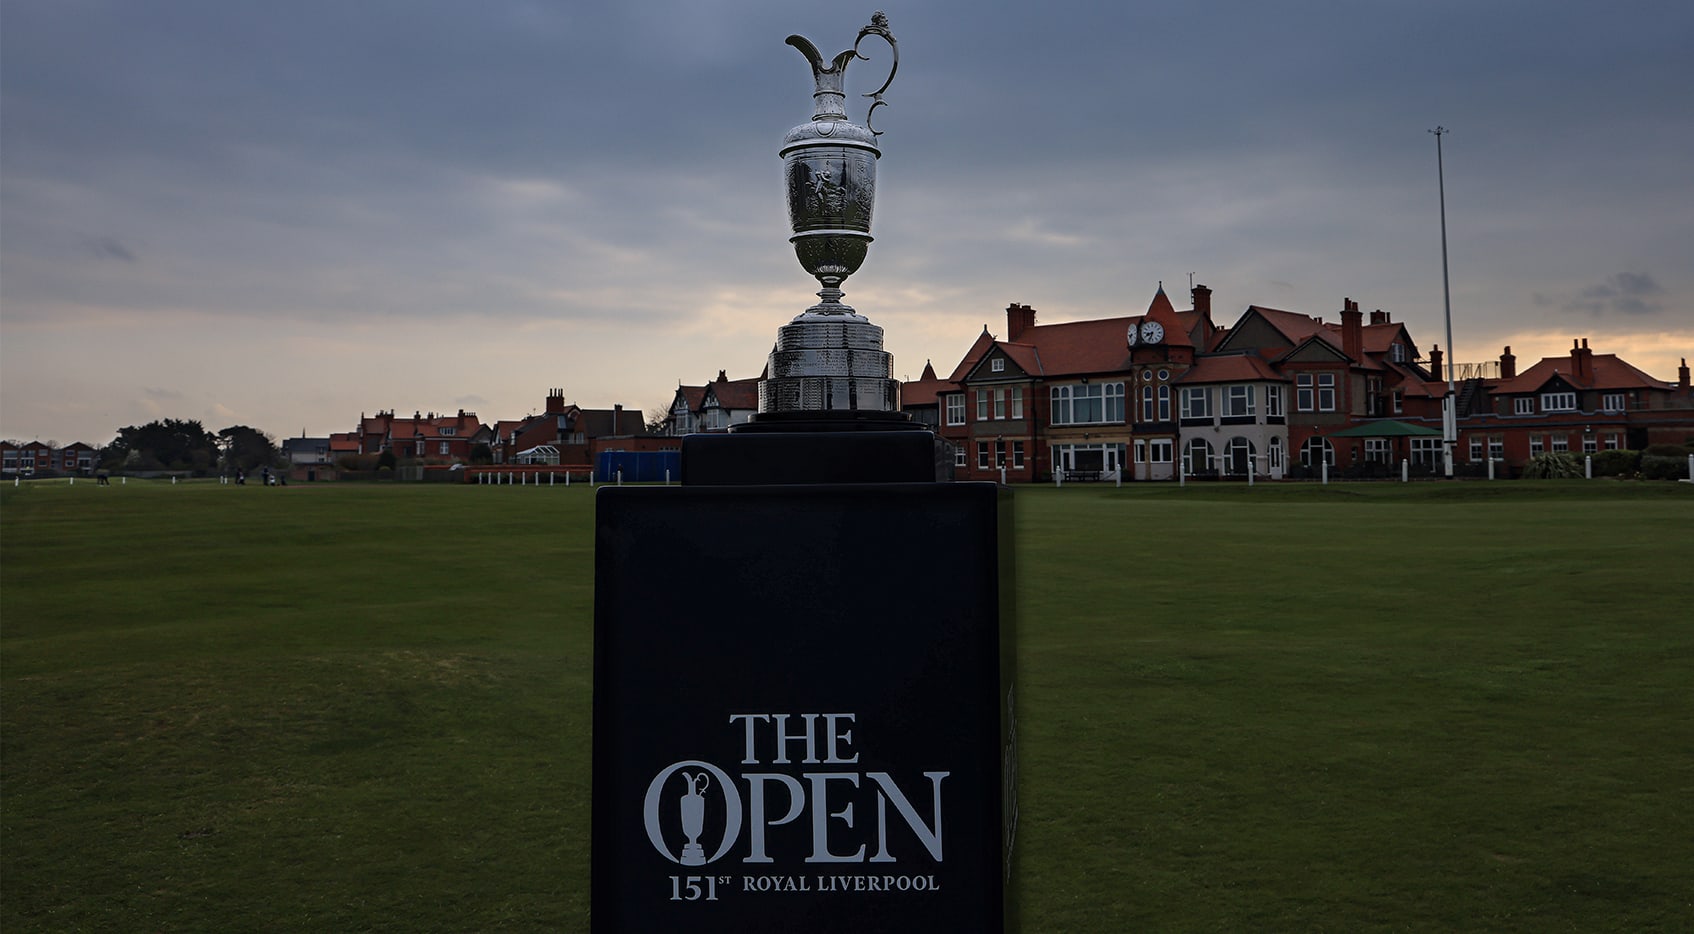 The First Look: The Open Championship